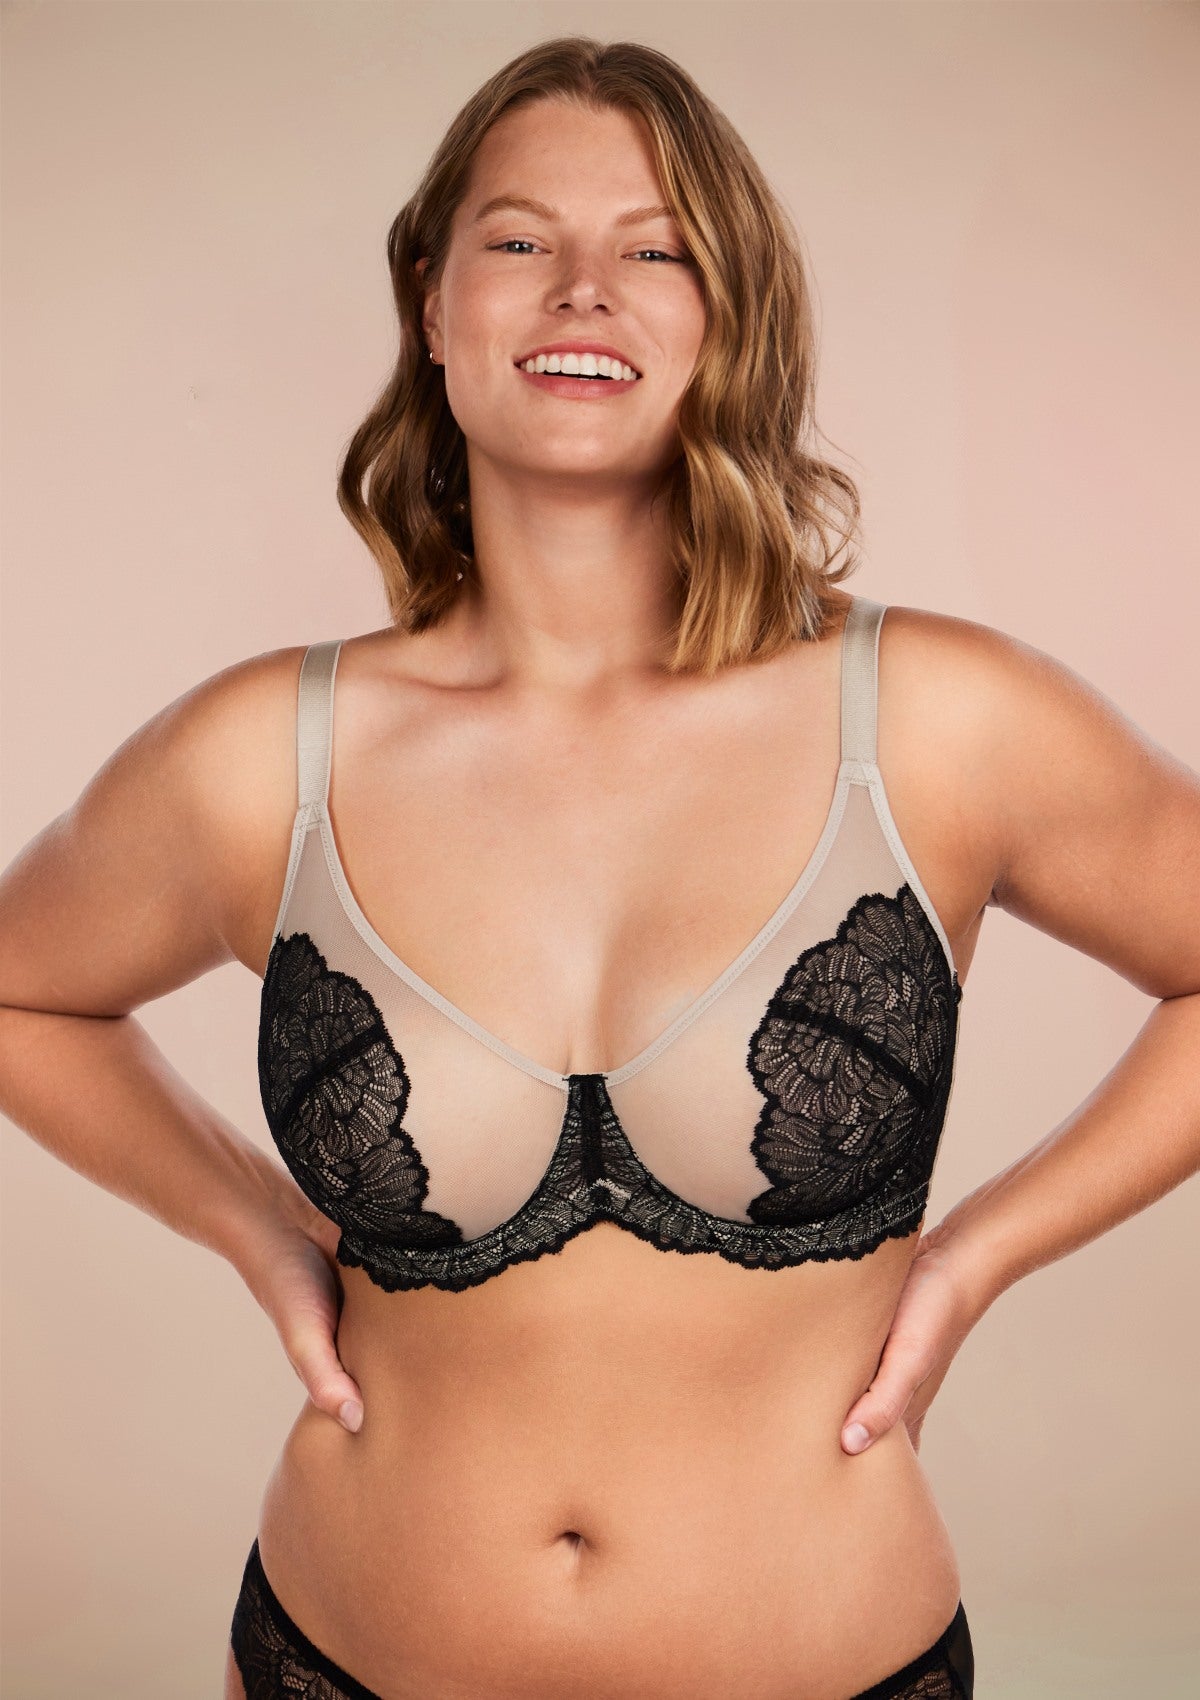 HSIA Blossom Matching Bra And Panties: Beautiful Everyday Bra - Black Contrast Apricot / 38 / D